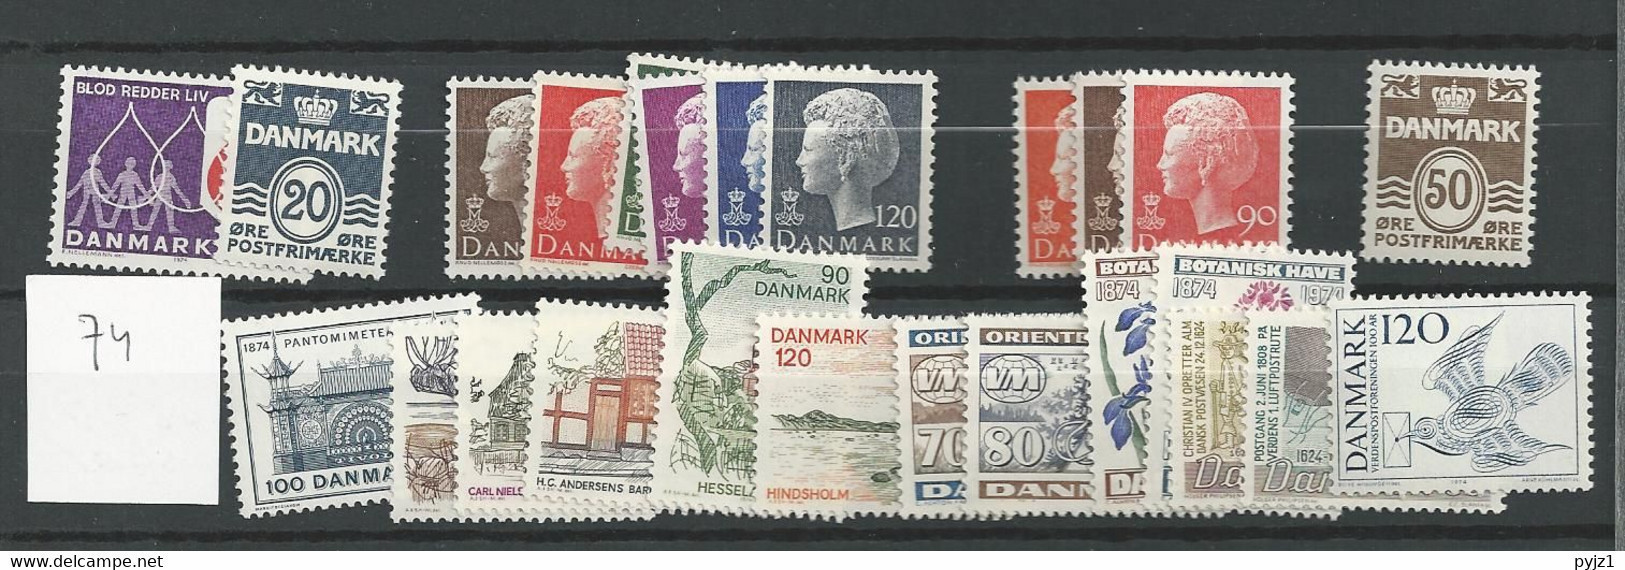 1974 MNH Denmark, Year Complete, Postfris** - Annate Complete